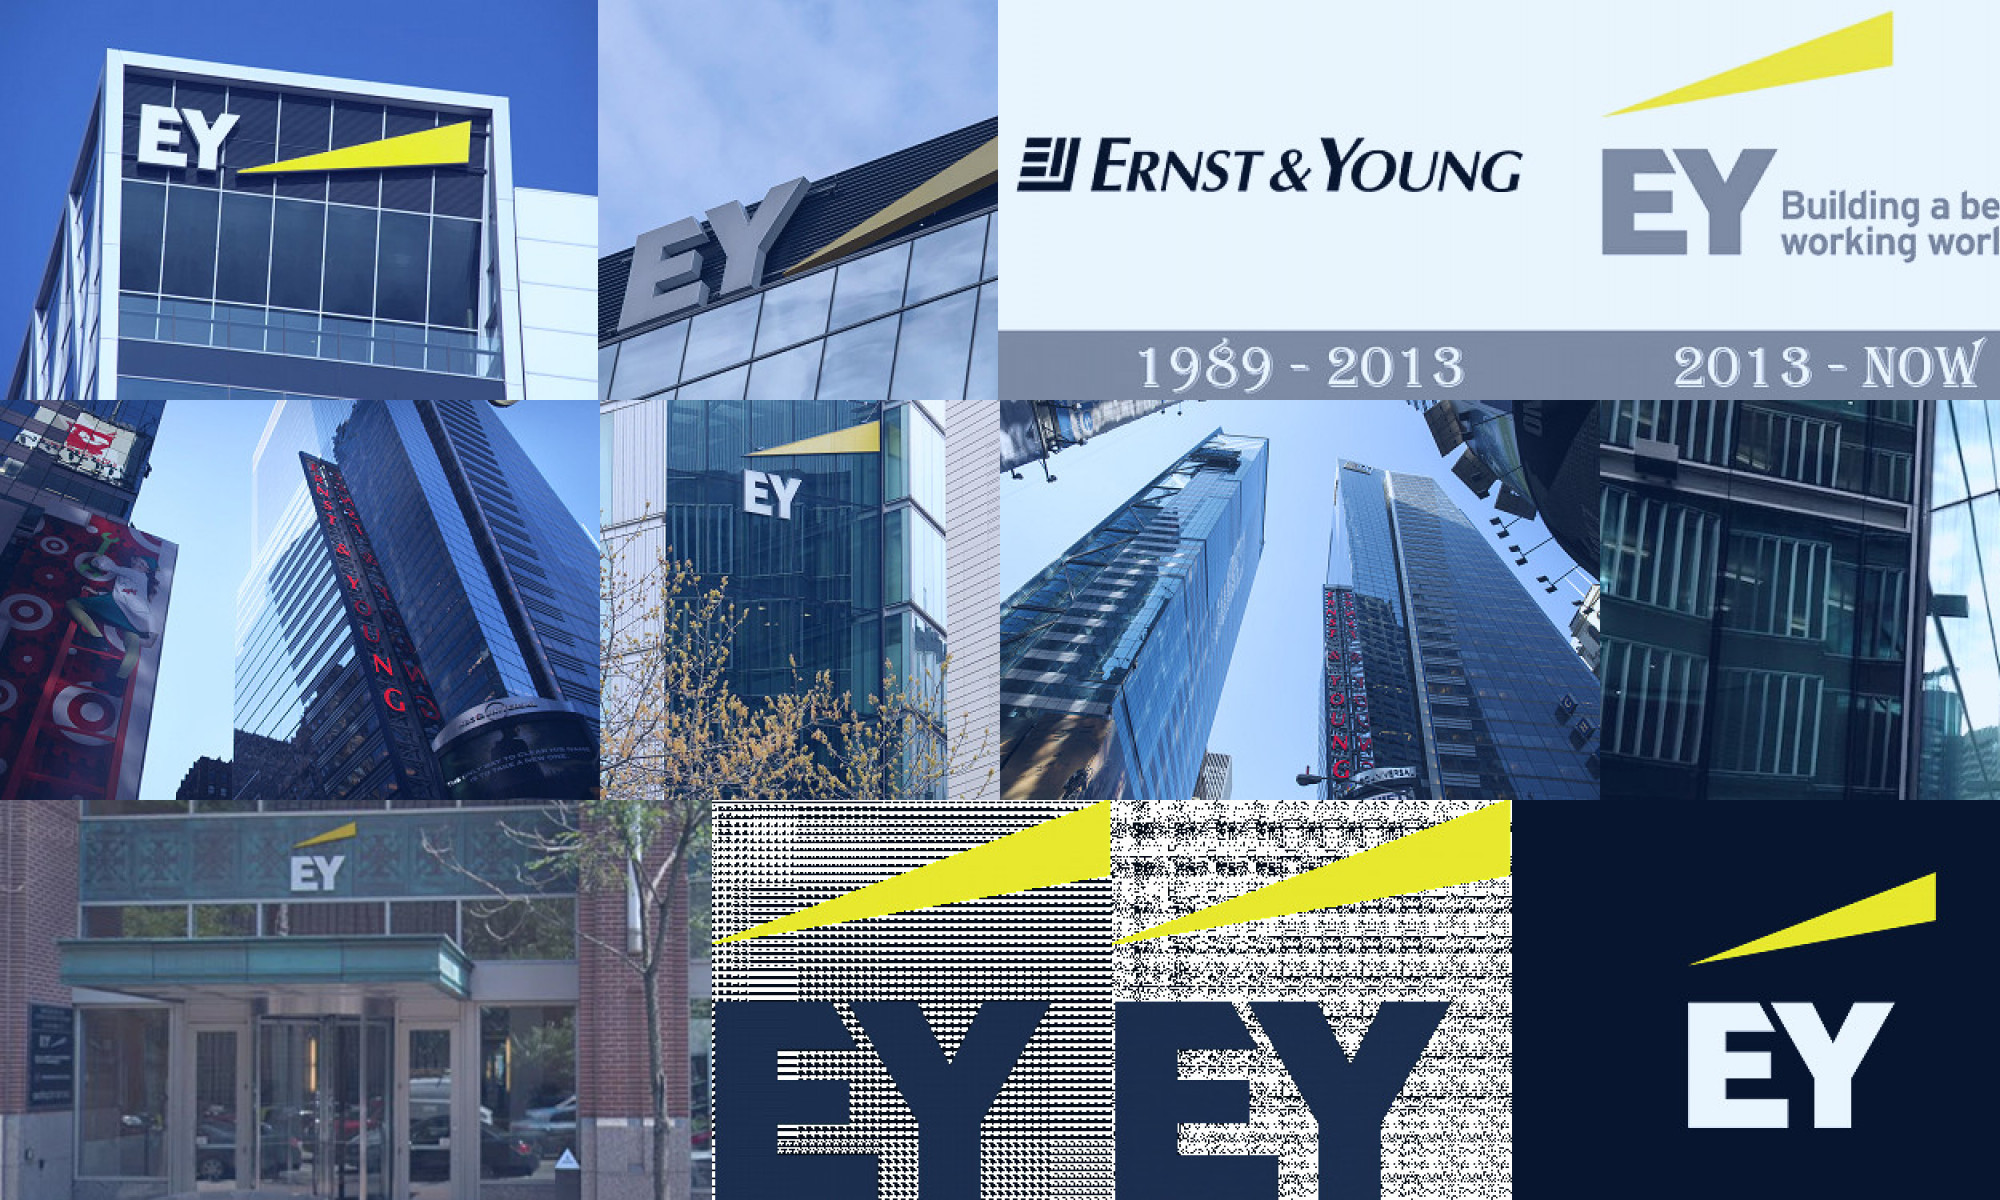 ernst & young